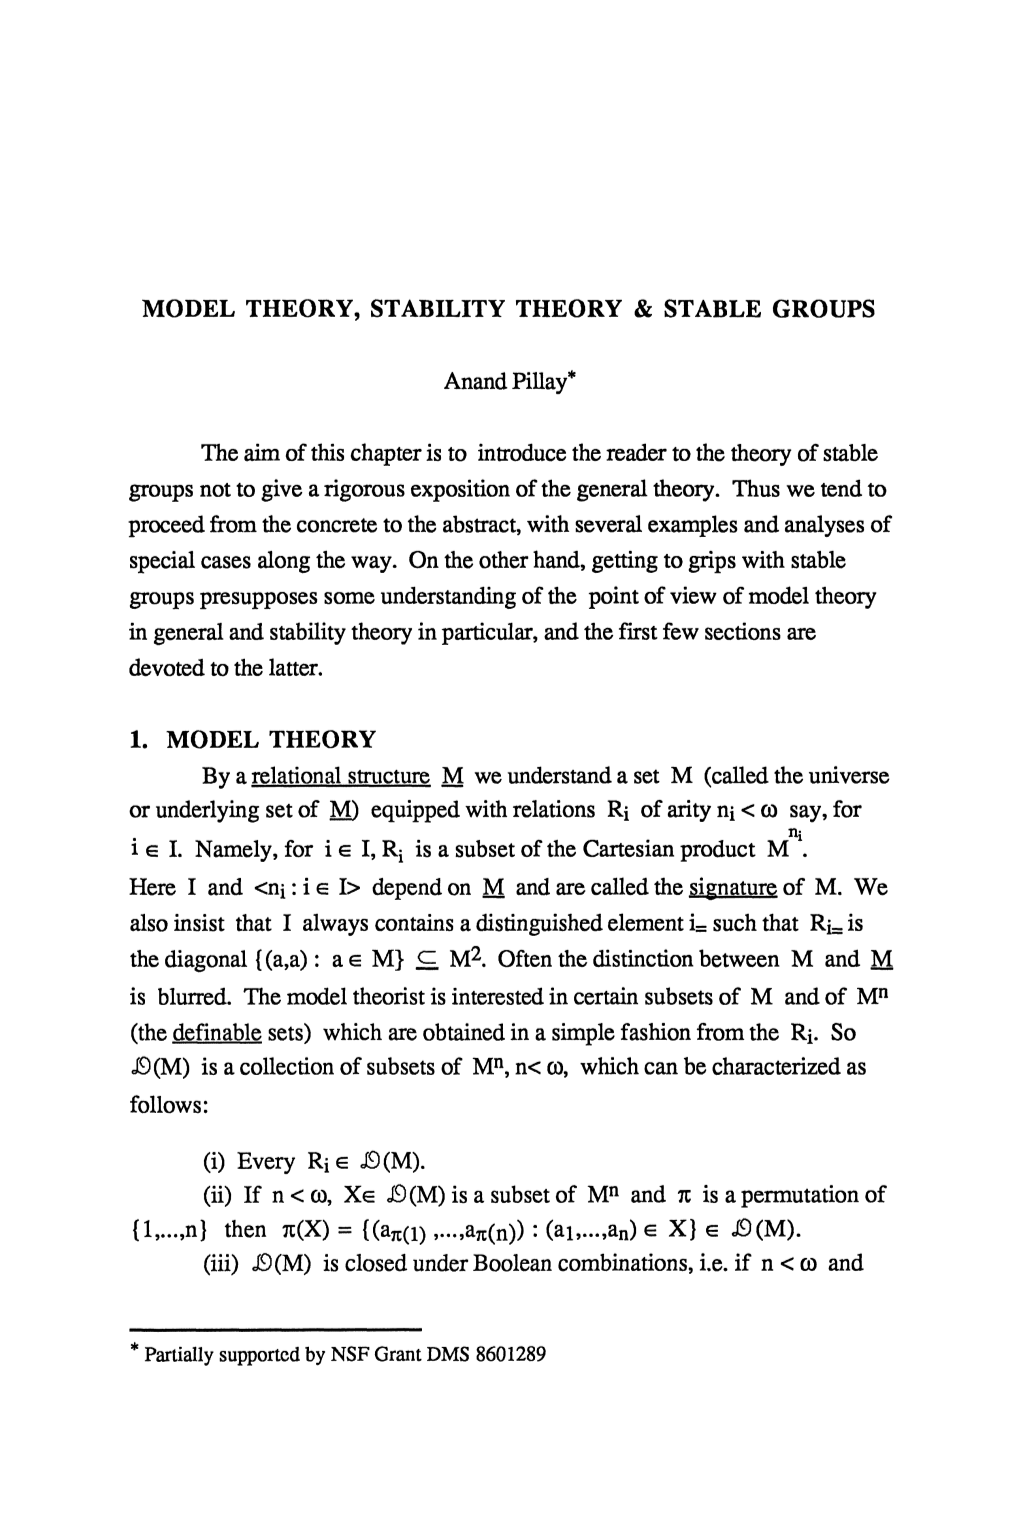 assignment in model theory